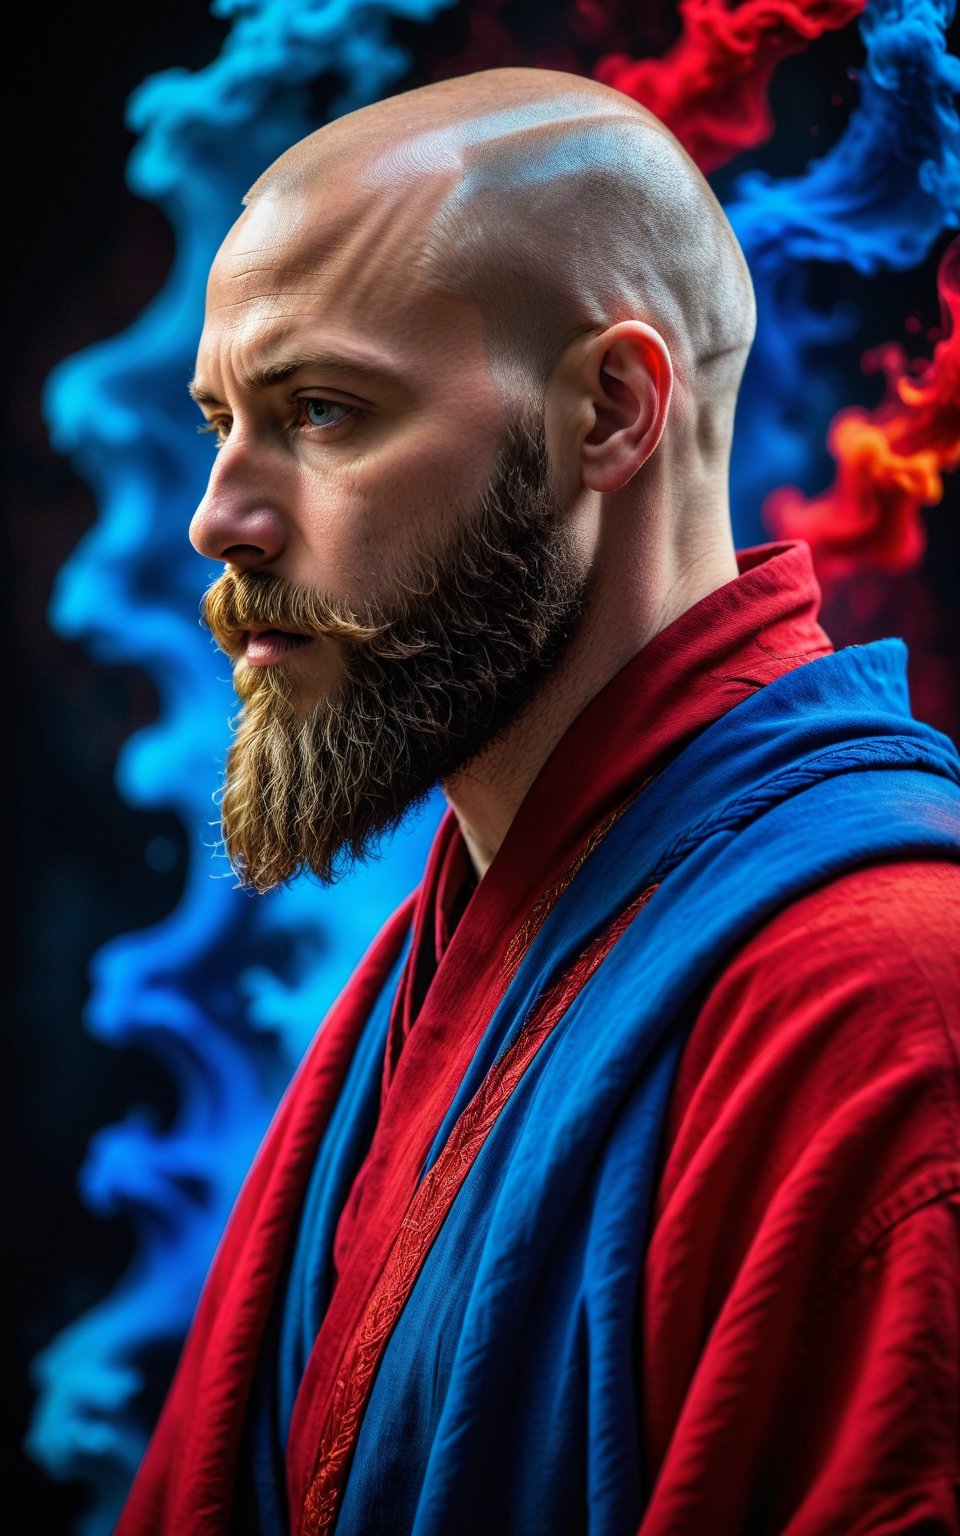 (best quality, 4K, 8K, high-resolution, masterpiece), ultra-detailed, realistic, photorealistic, portrait of a man with a beard, side profile, intense expression, shaved head, red and blue color scheme, dramatic lighting, flowing robes, abstract background, red tones, blue tones, high contrast, textured clothing, dynamic composition, high detail, high resolution, 1man, solo, side view, red robes, intense gaze.